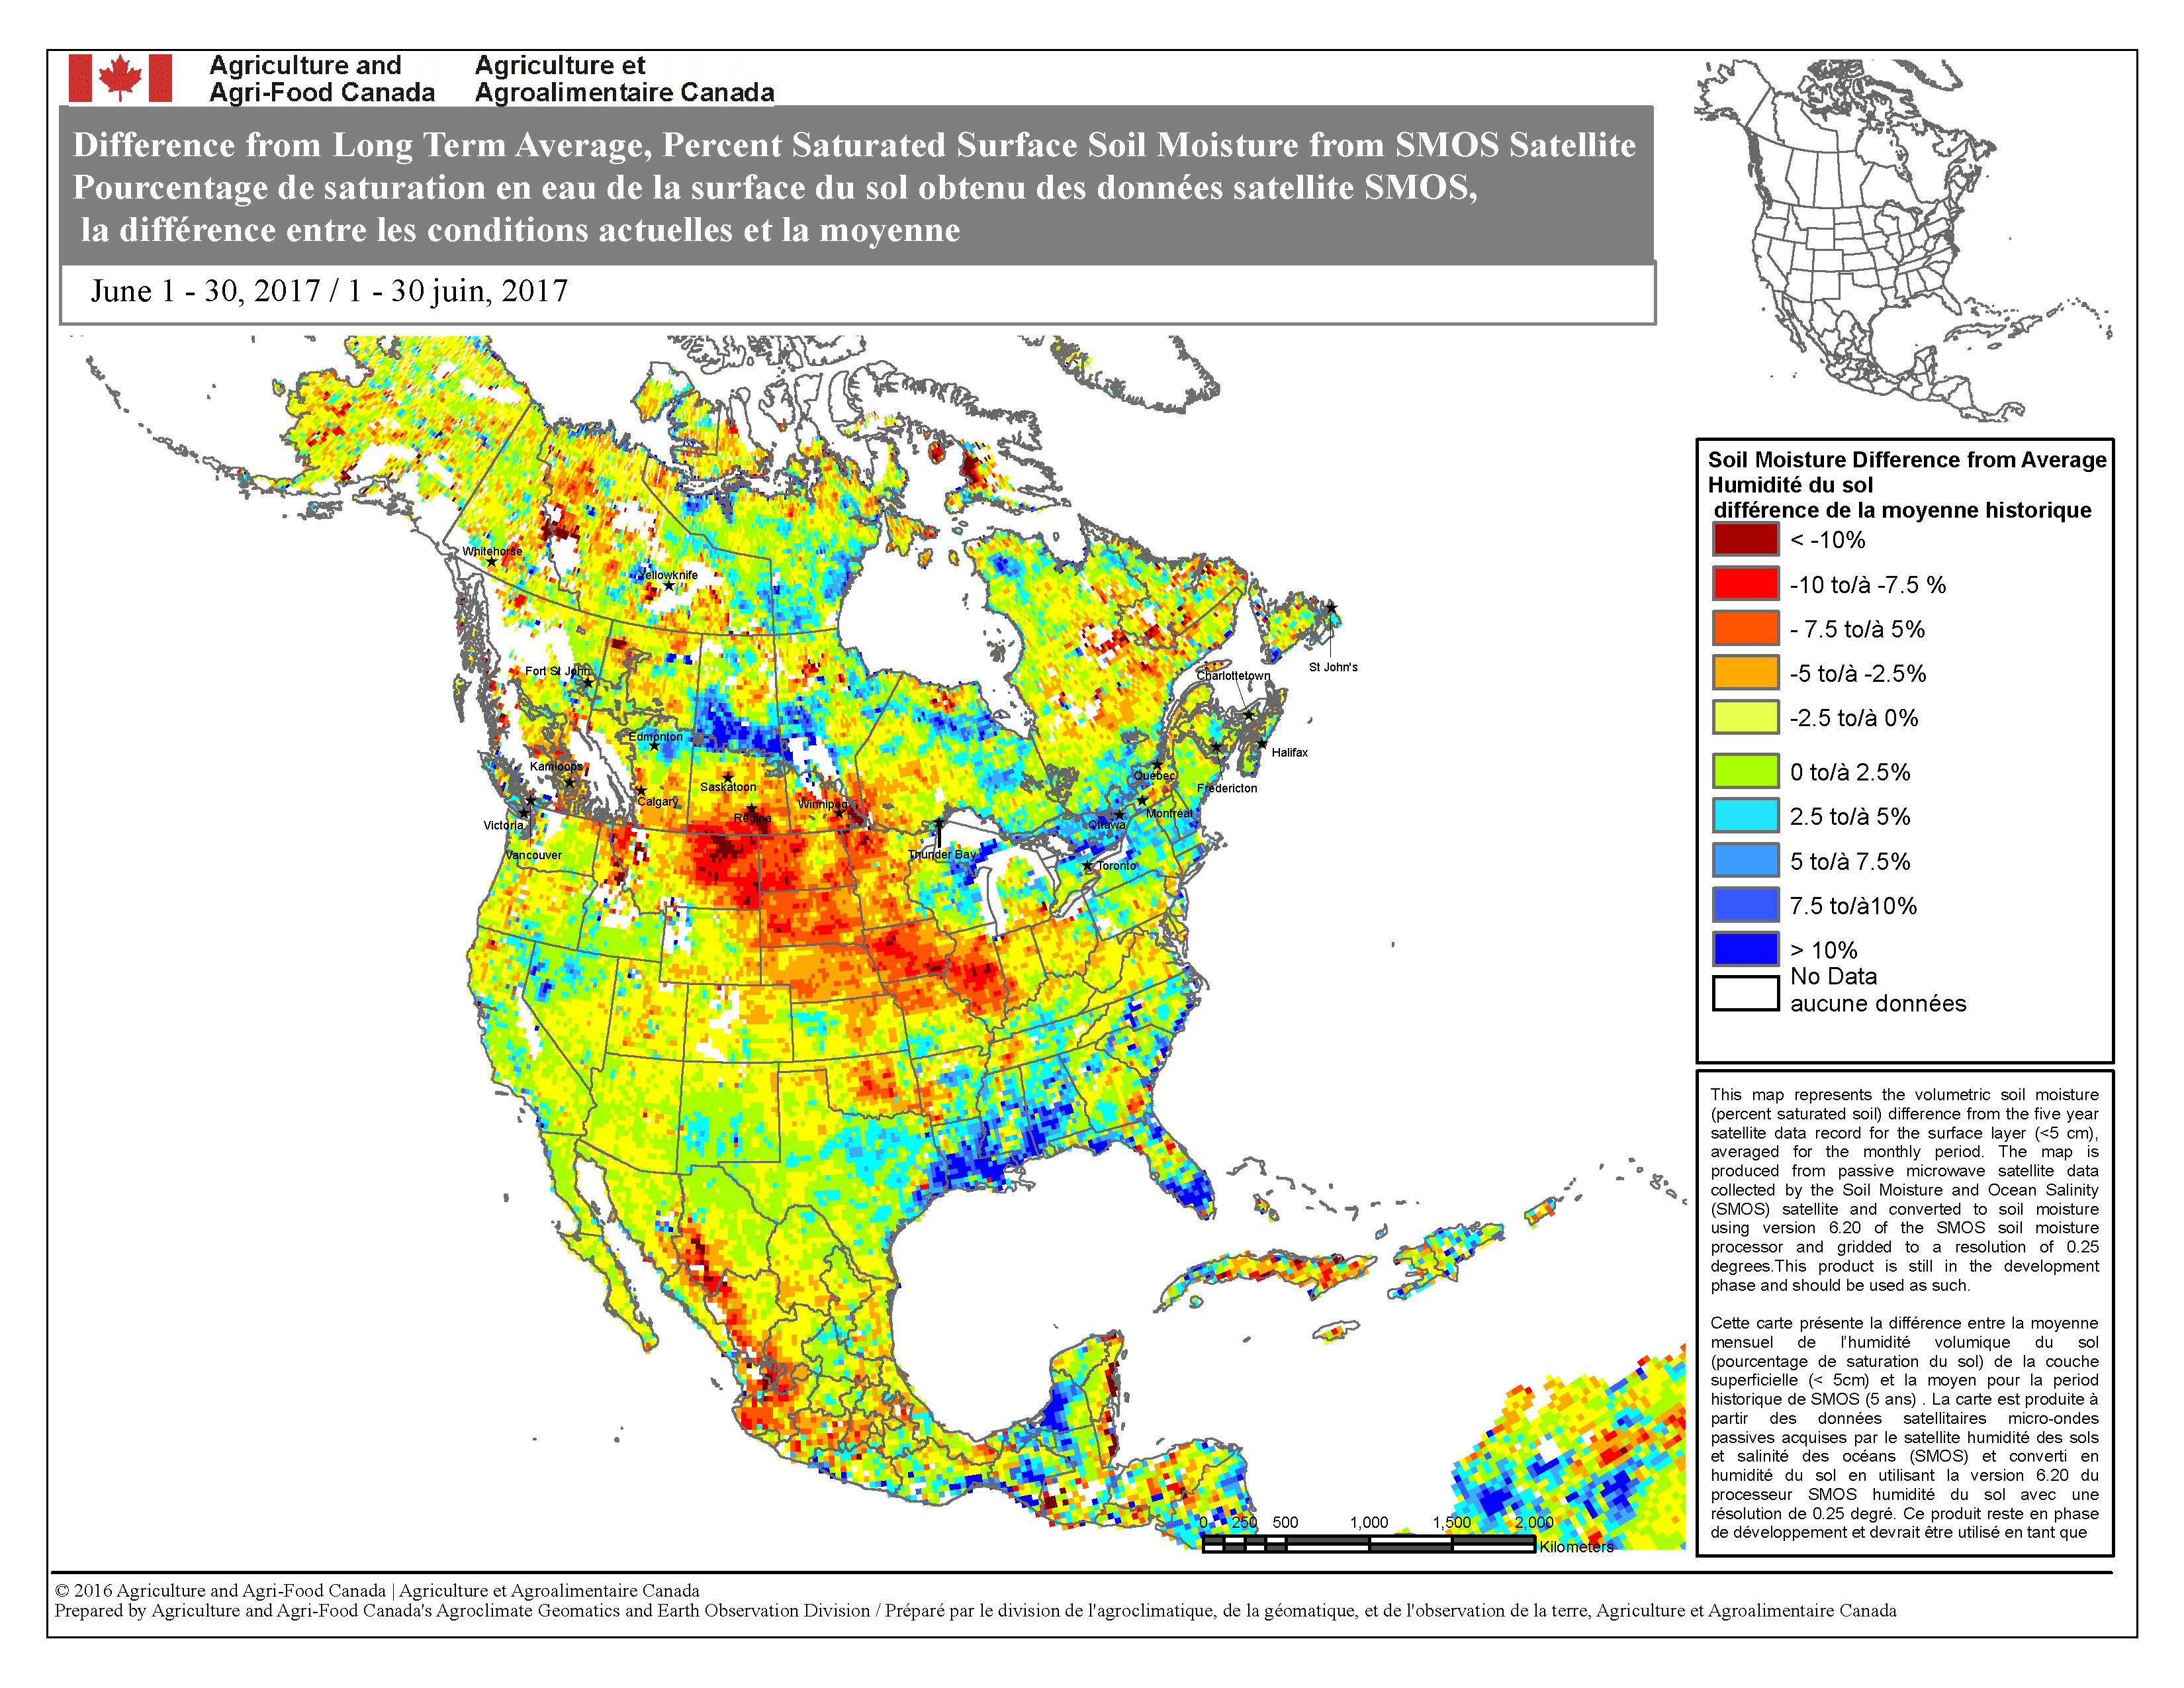 SMOS soil moisture percentiles map for current month